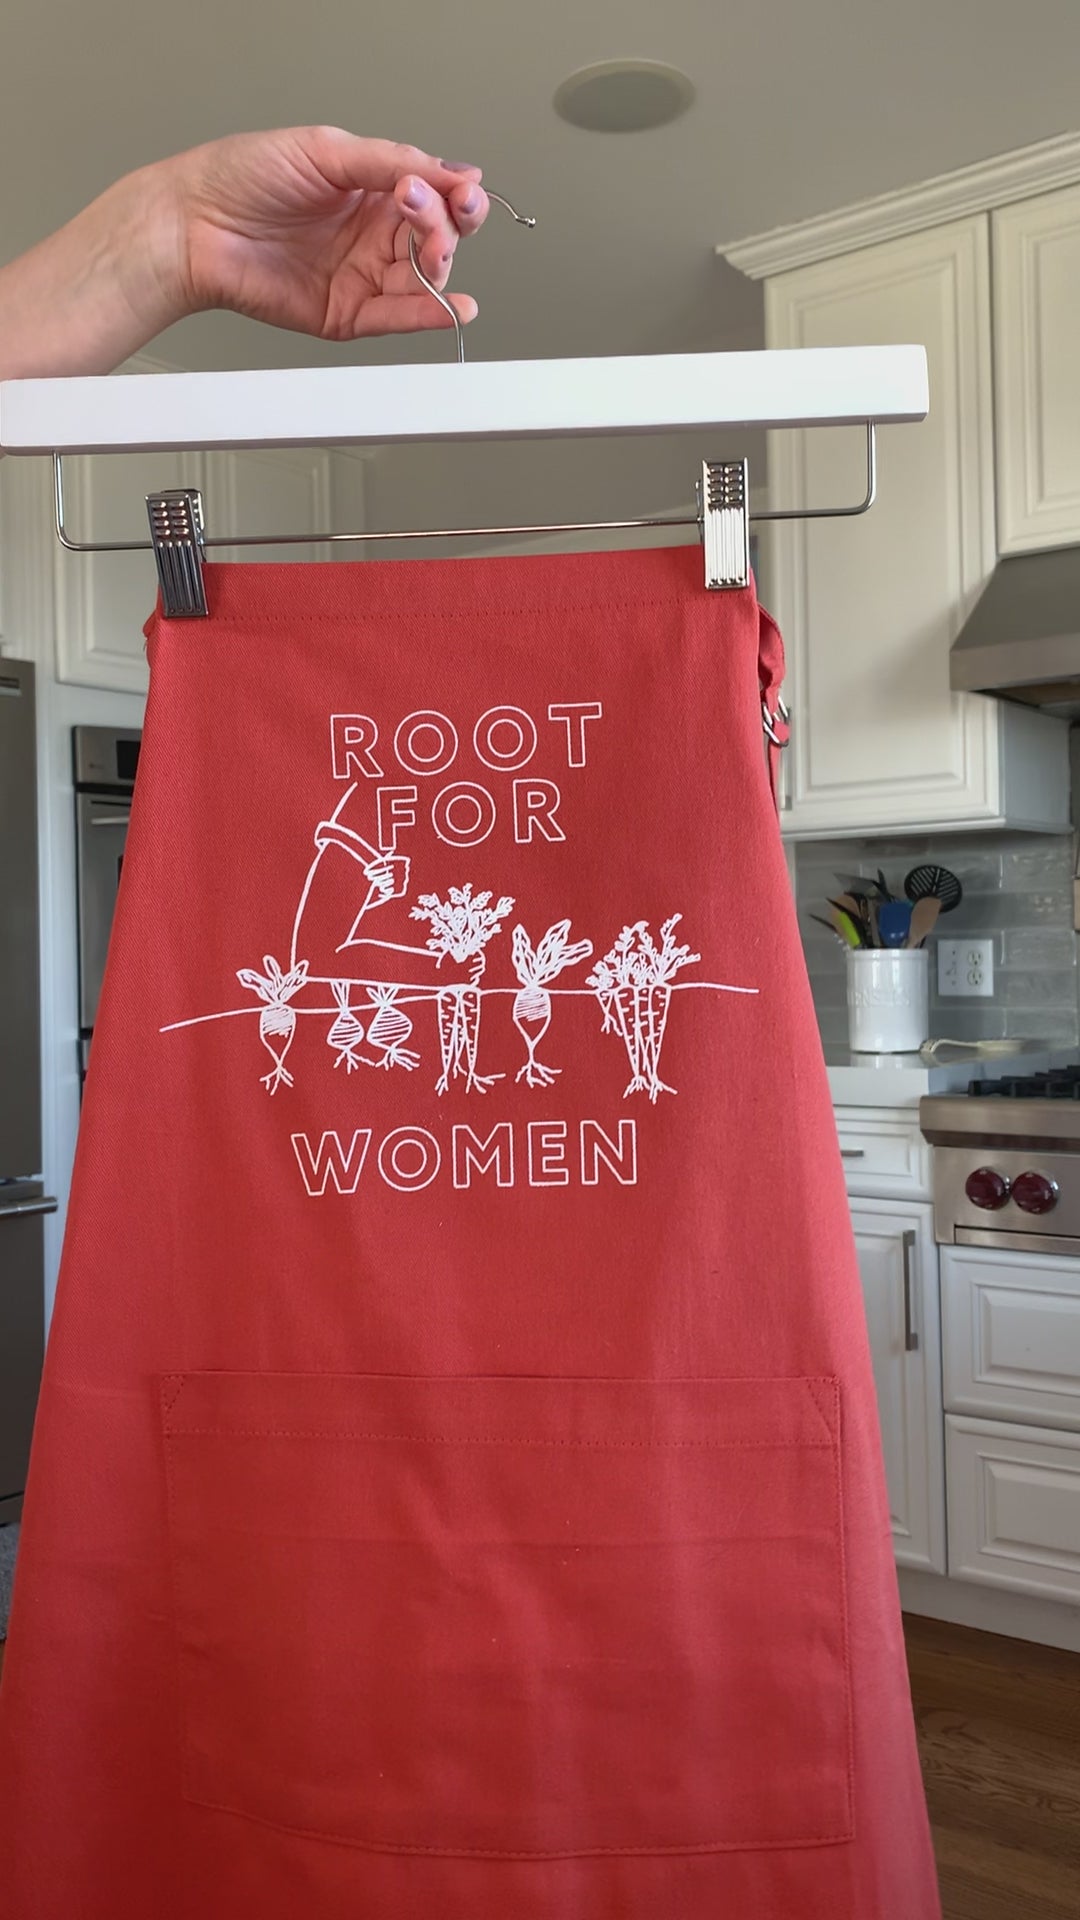 An orange apron that reads "Root for Women" in white block letters hangs on a hanger